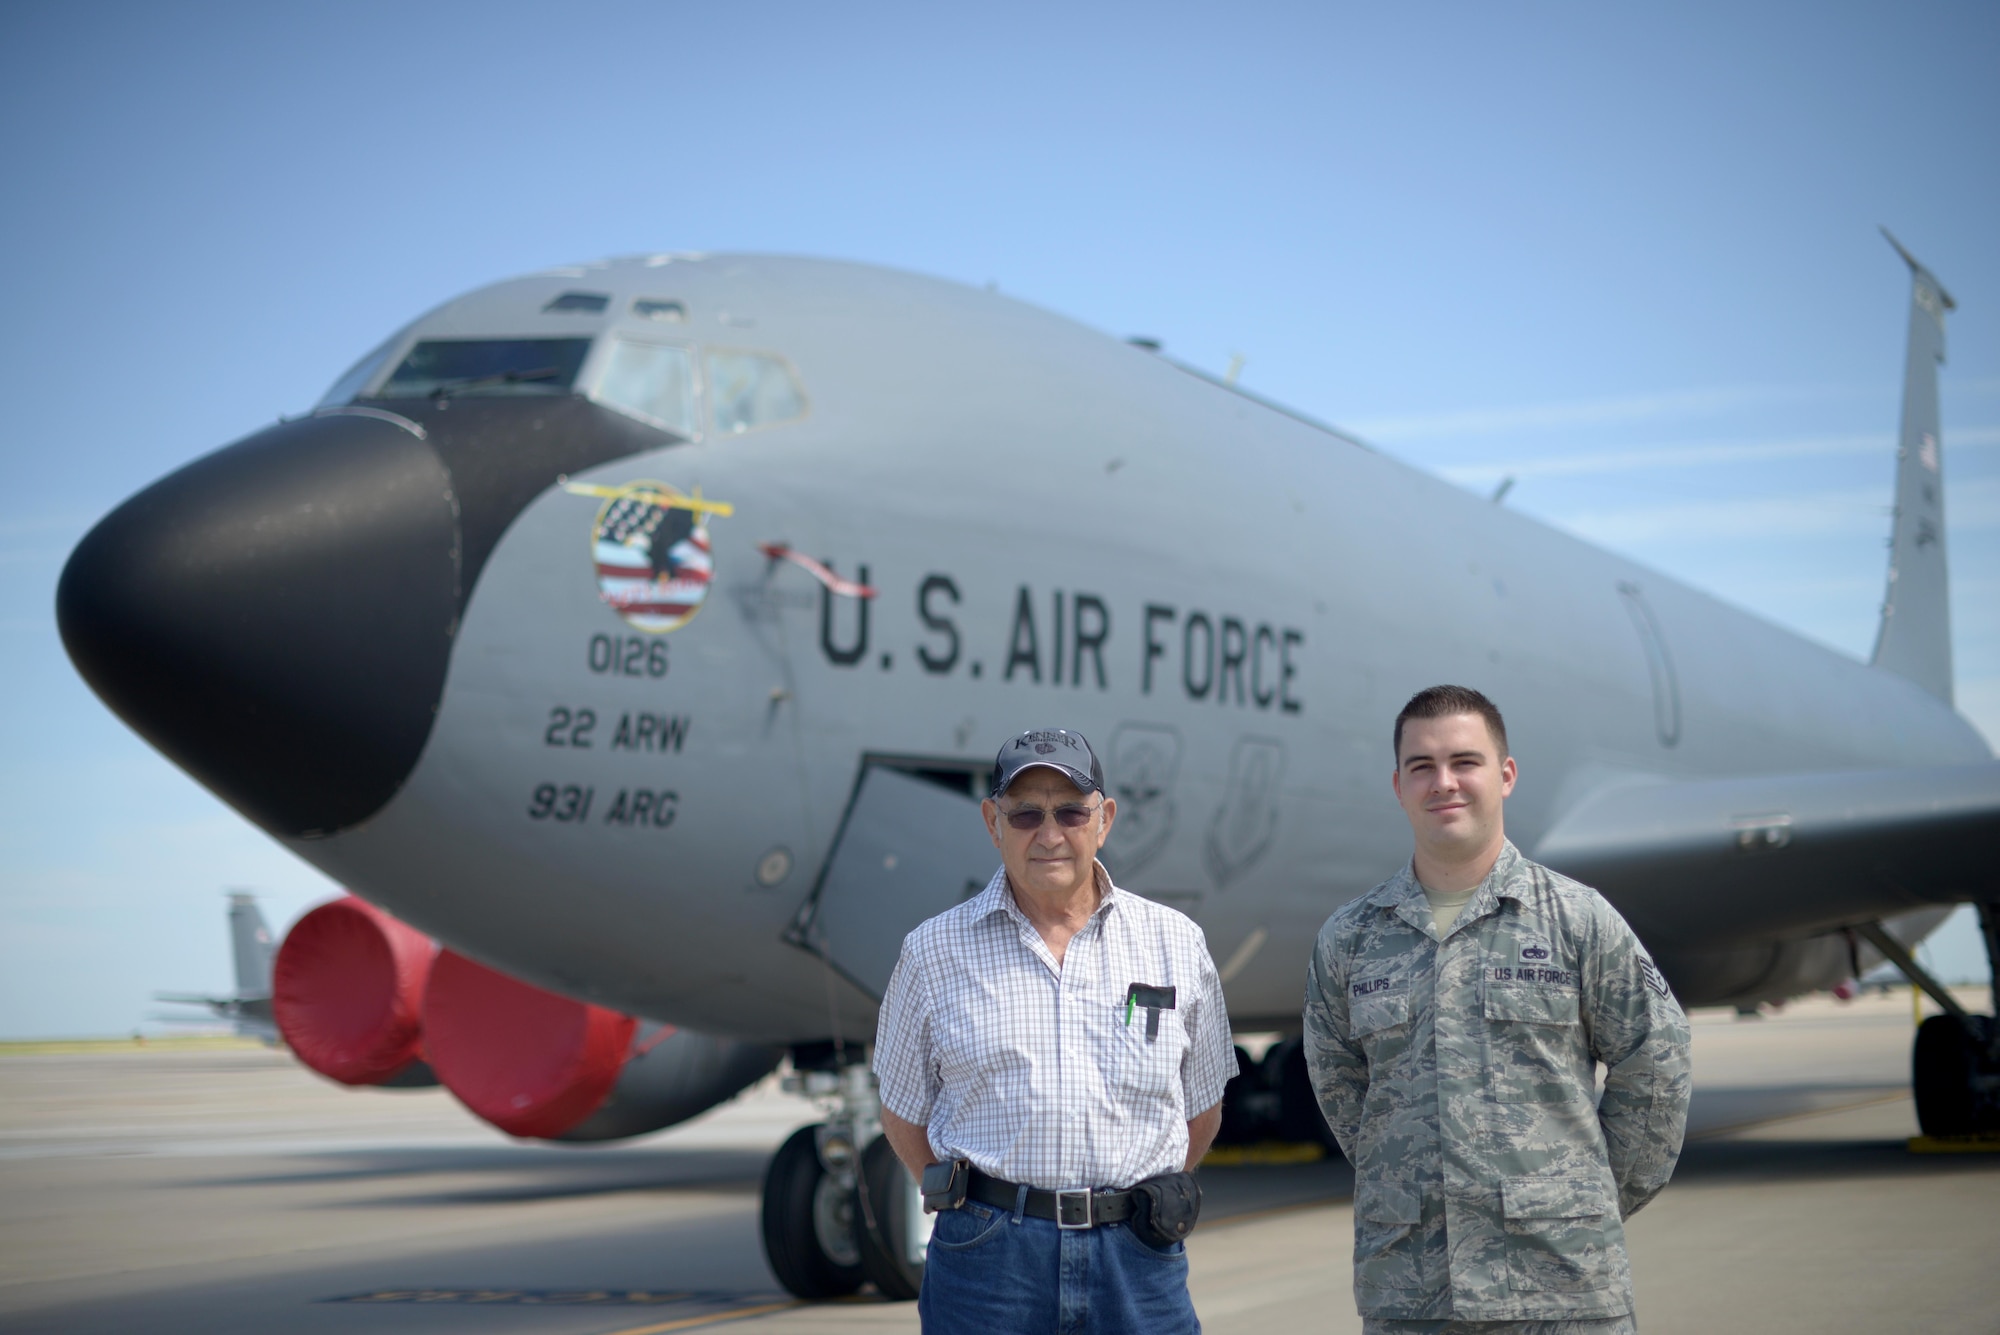 Staff Sgt. Austin Phillips, 22nd Maintenance Squadron wheel and tire section chief, right, poses with his grandfather, retired Staff Sgt. Raymond Hopper, in front of a KC-135 Stratotanker, June 25, 2016, at McConnell Air Force Base, Kan. Phillips is assigned to the KC-135, one of the same airframes his grandfather once worked on nearly 60 years before. (U.S. Air Force photo/Airman 1st Class Christopher Thornbury)